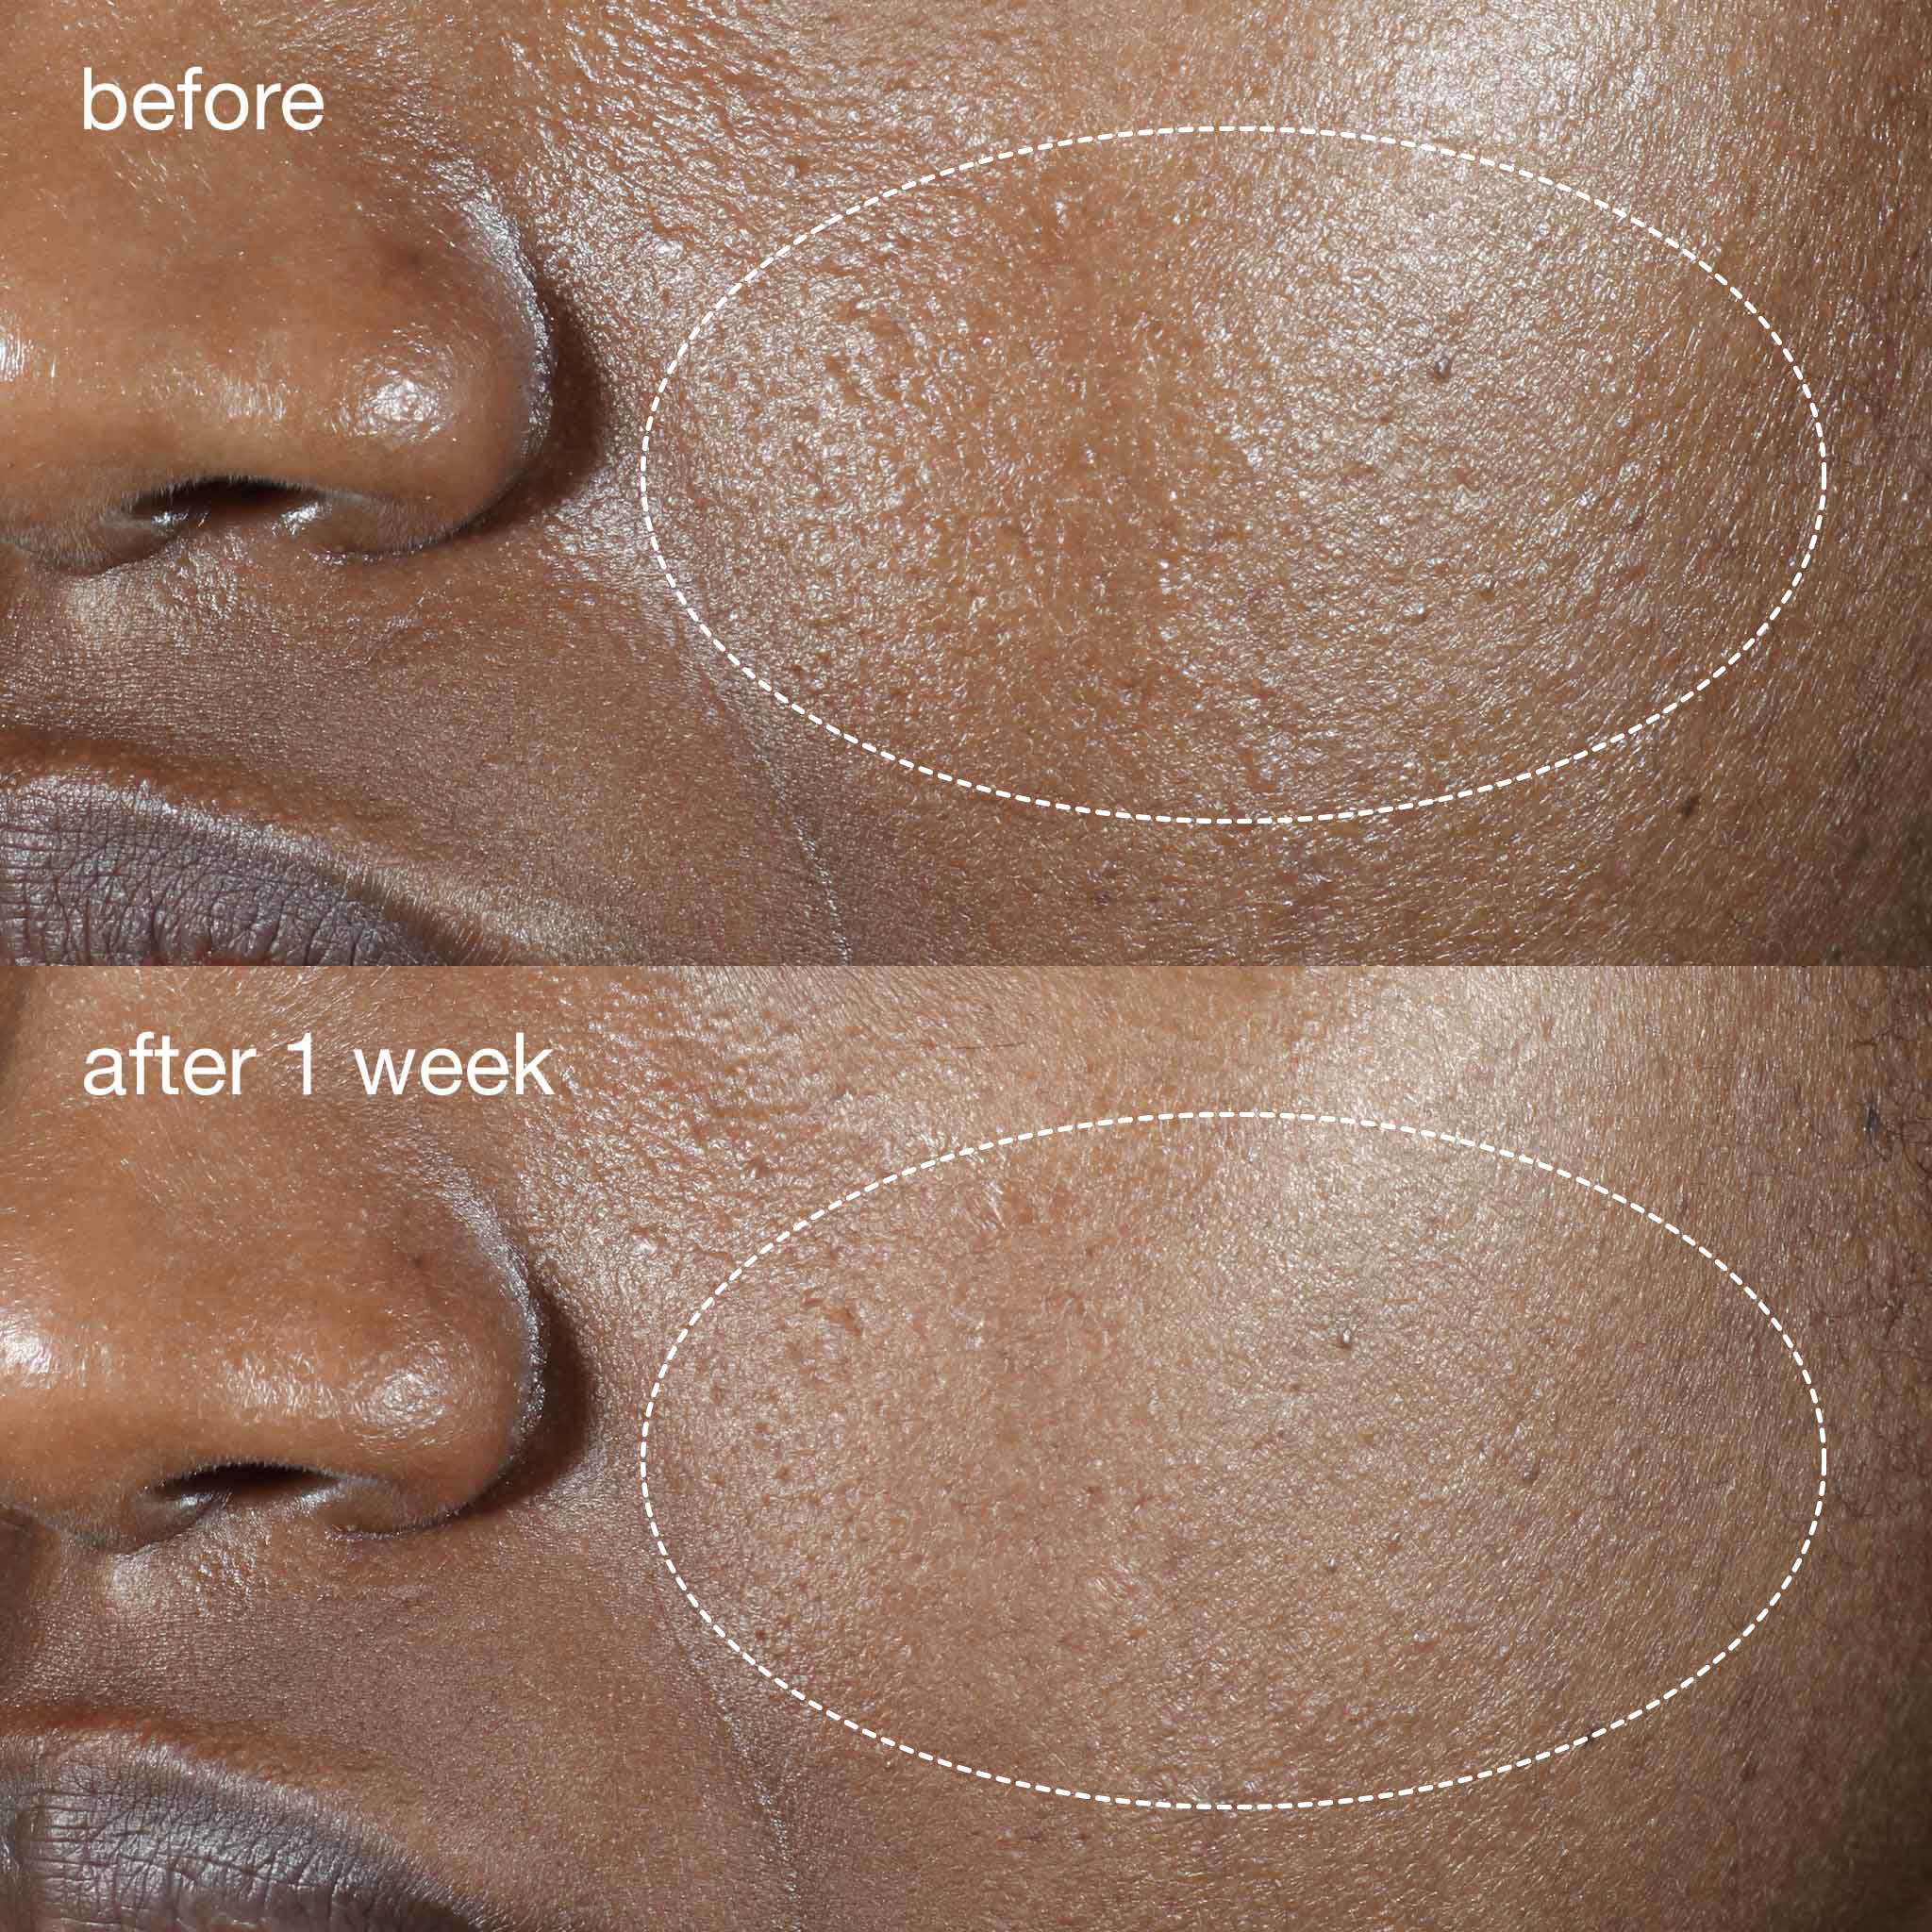 women before and after 1 week result using phyto nature oxygen cream